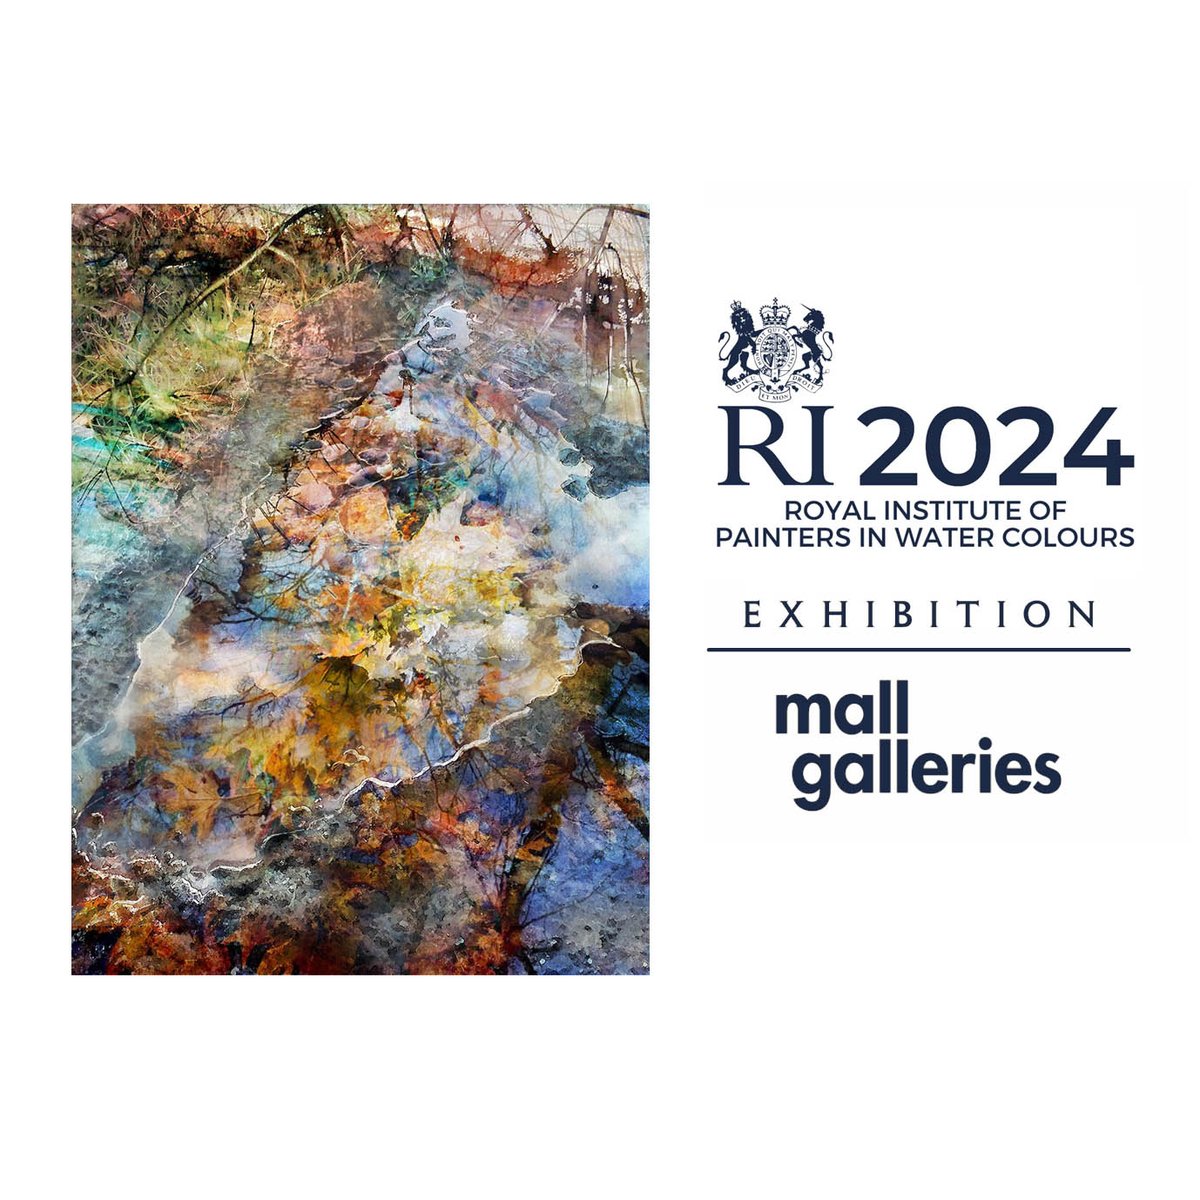 Chocolate not your thing? Nah, surely not but why not pop to the @mallgalleries to see some sweet treats at the @RIwatercolours exhibition on now until April 13th #watercolour #pastels #painting #London buyart.mallgalleries.org.uk/all-artworks/3…